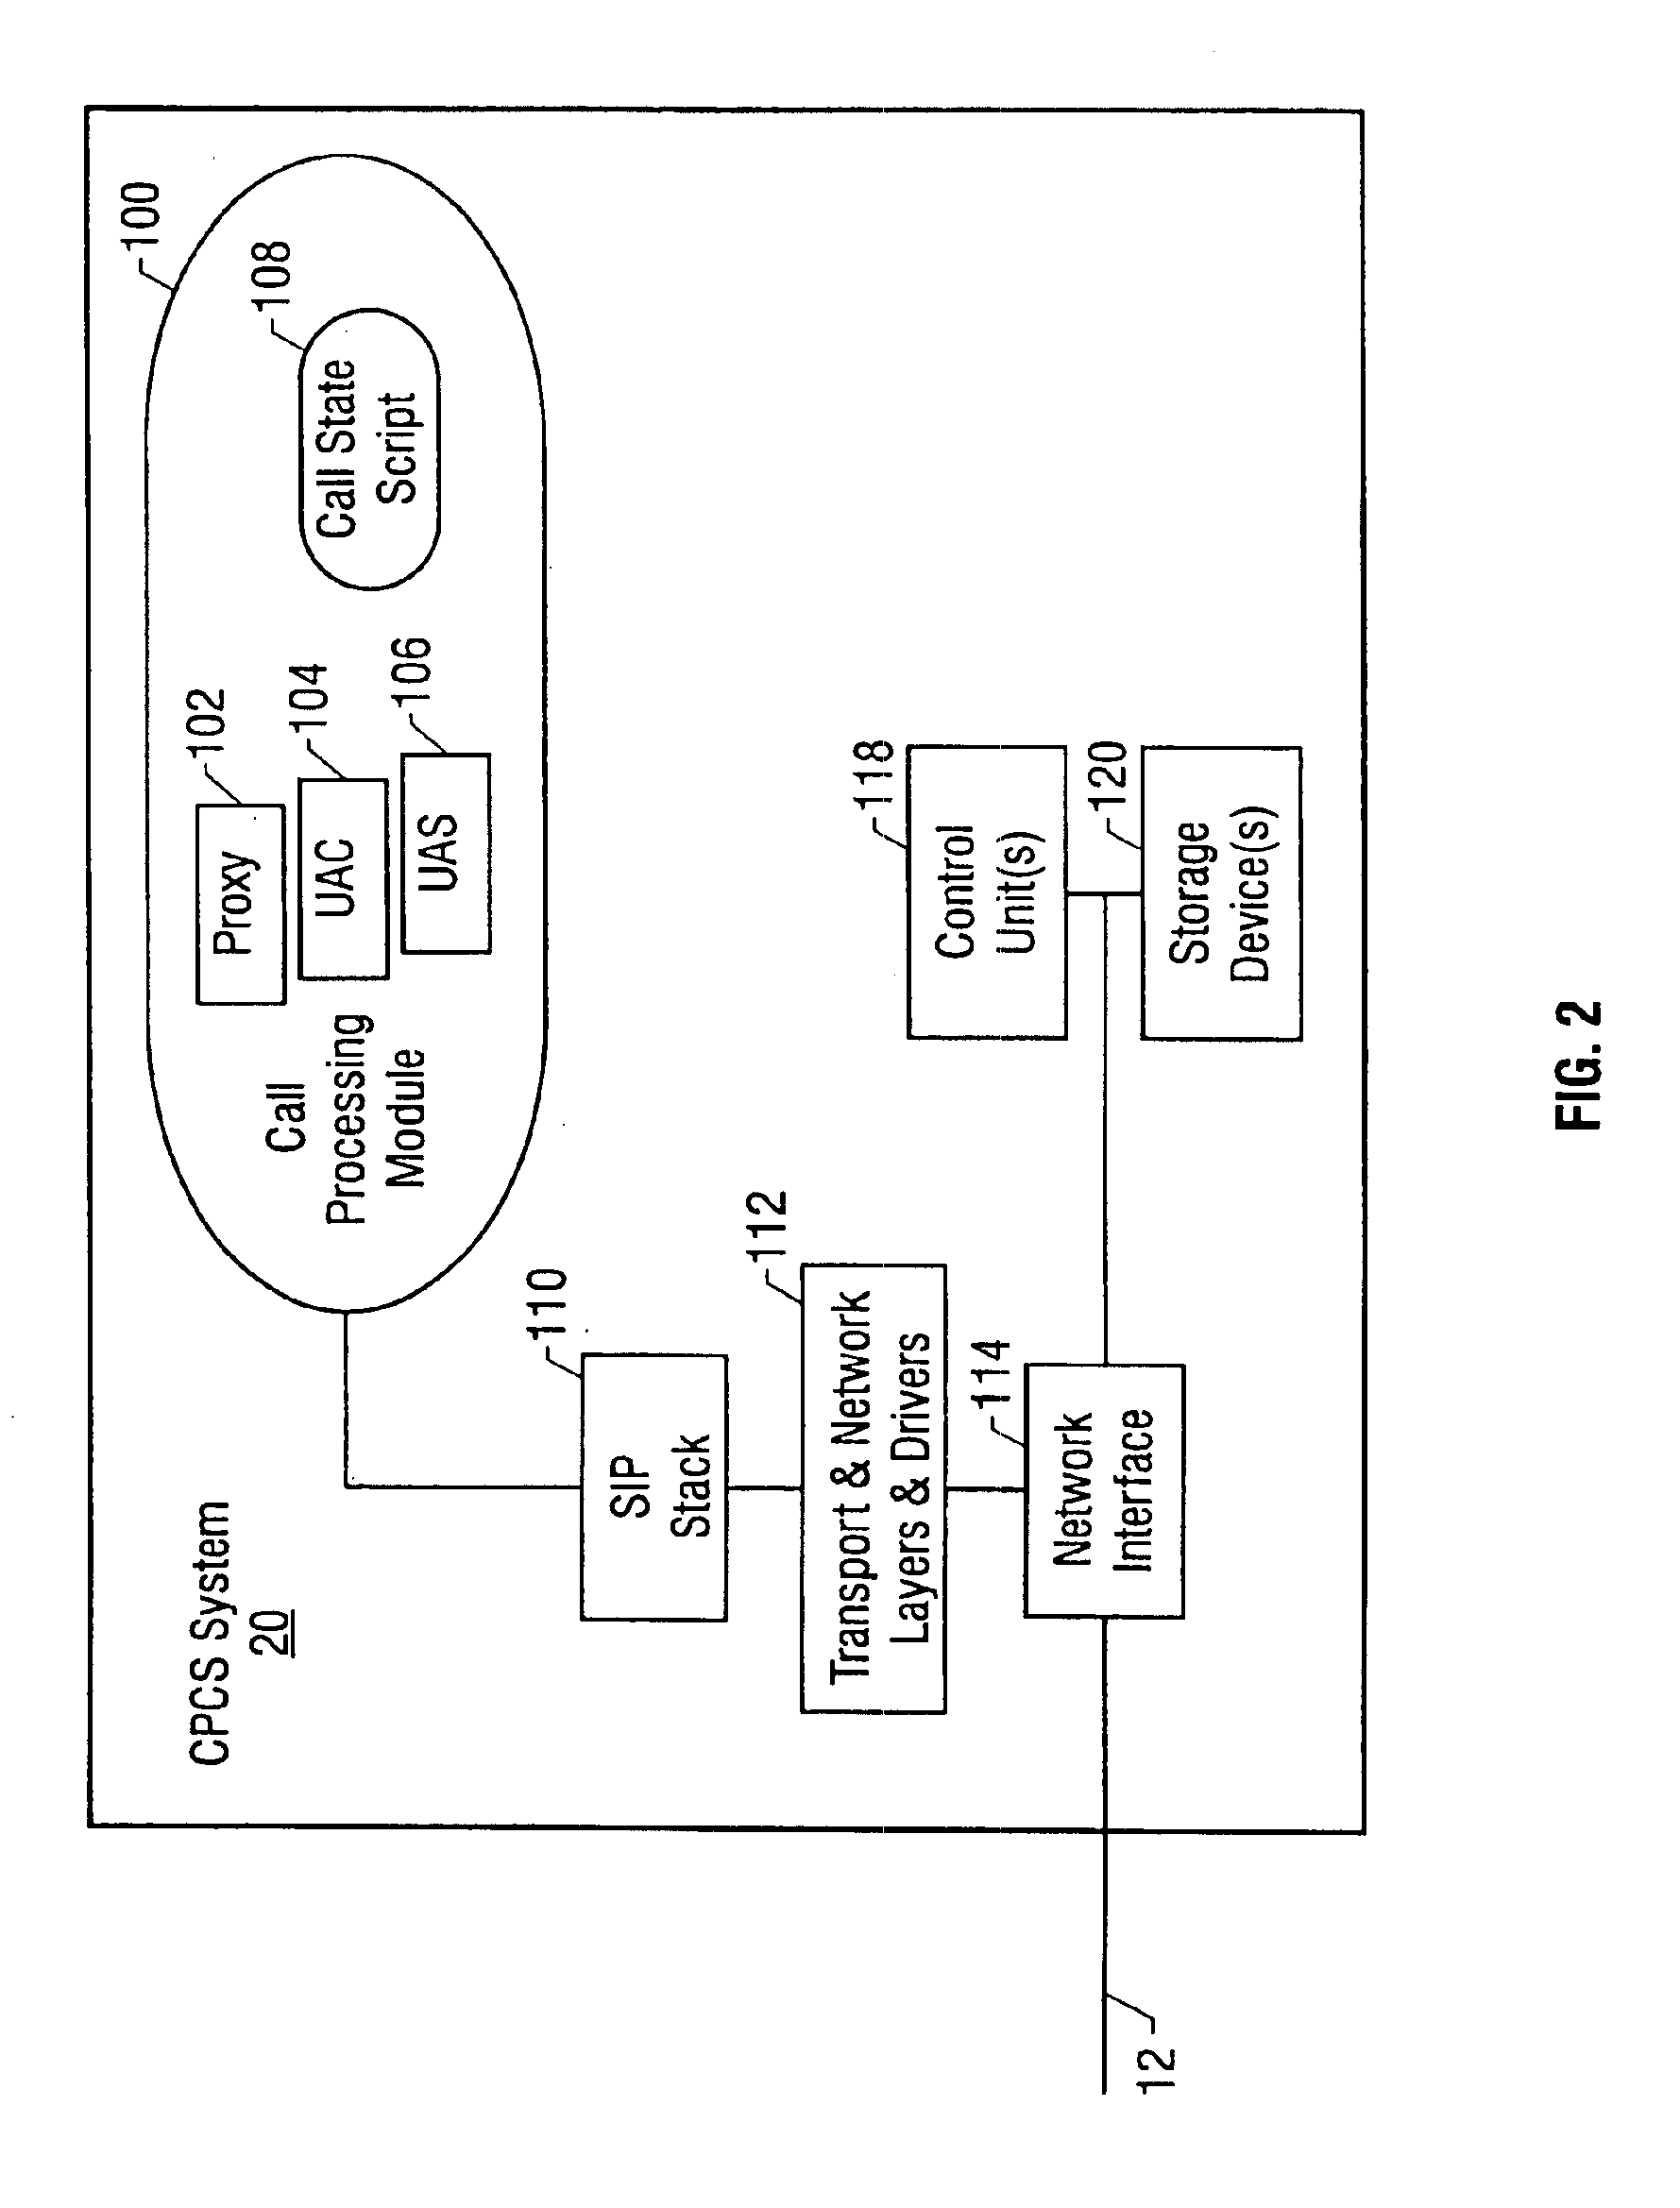 Method and apparatus for call processing in response to a call request from an originating device